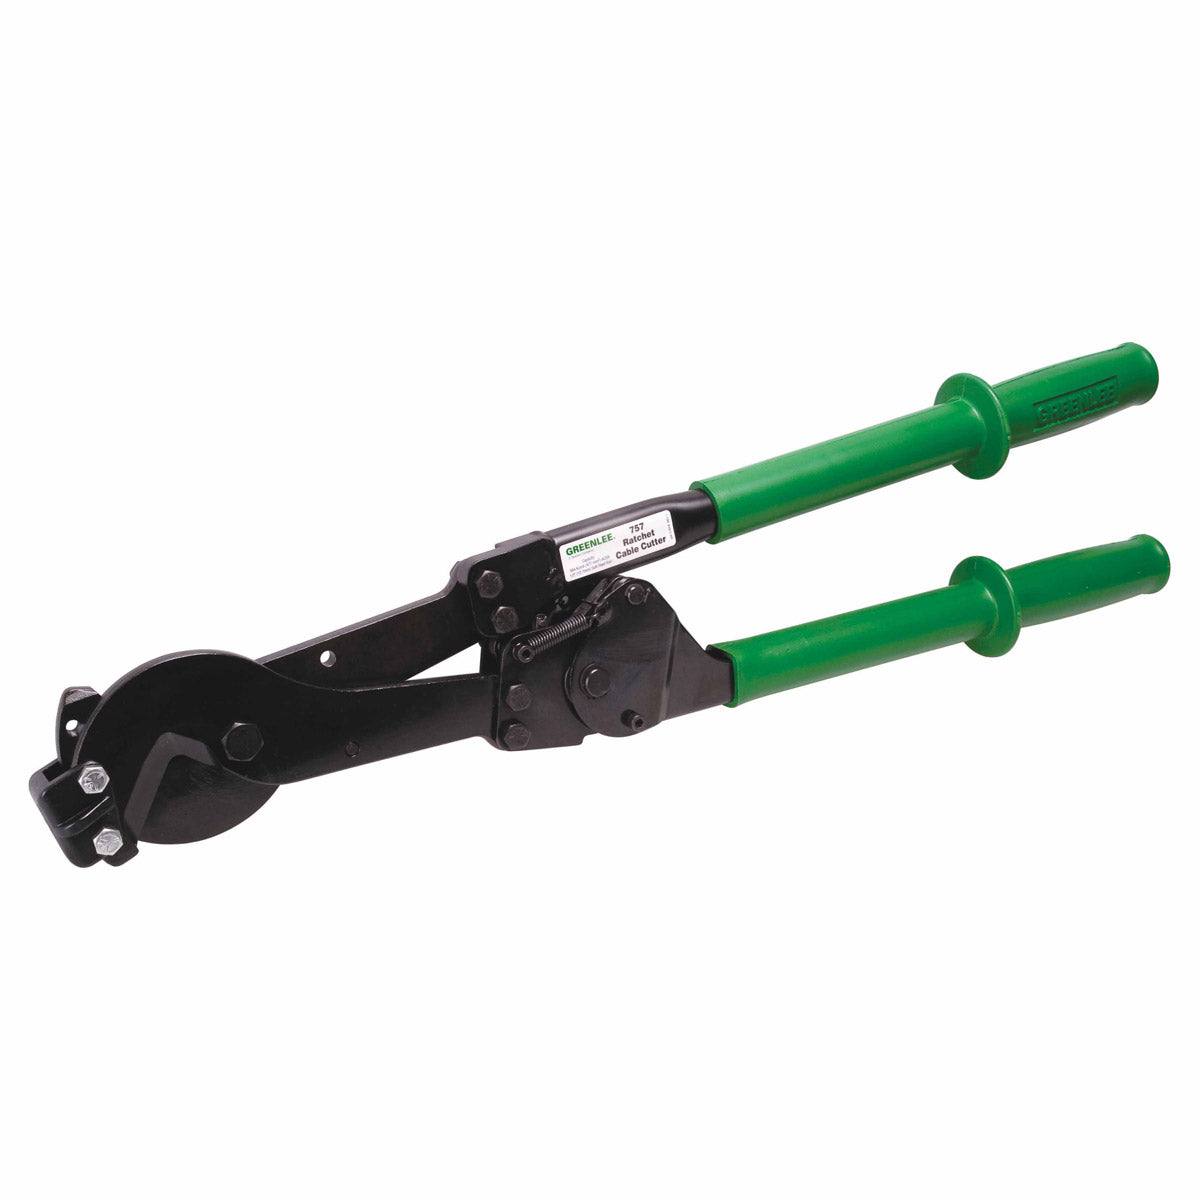 Greenlee 757 Ratchet ACSR/Cable Cutter